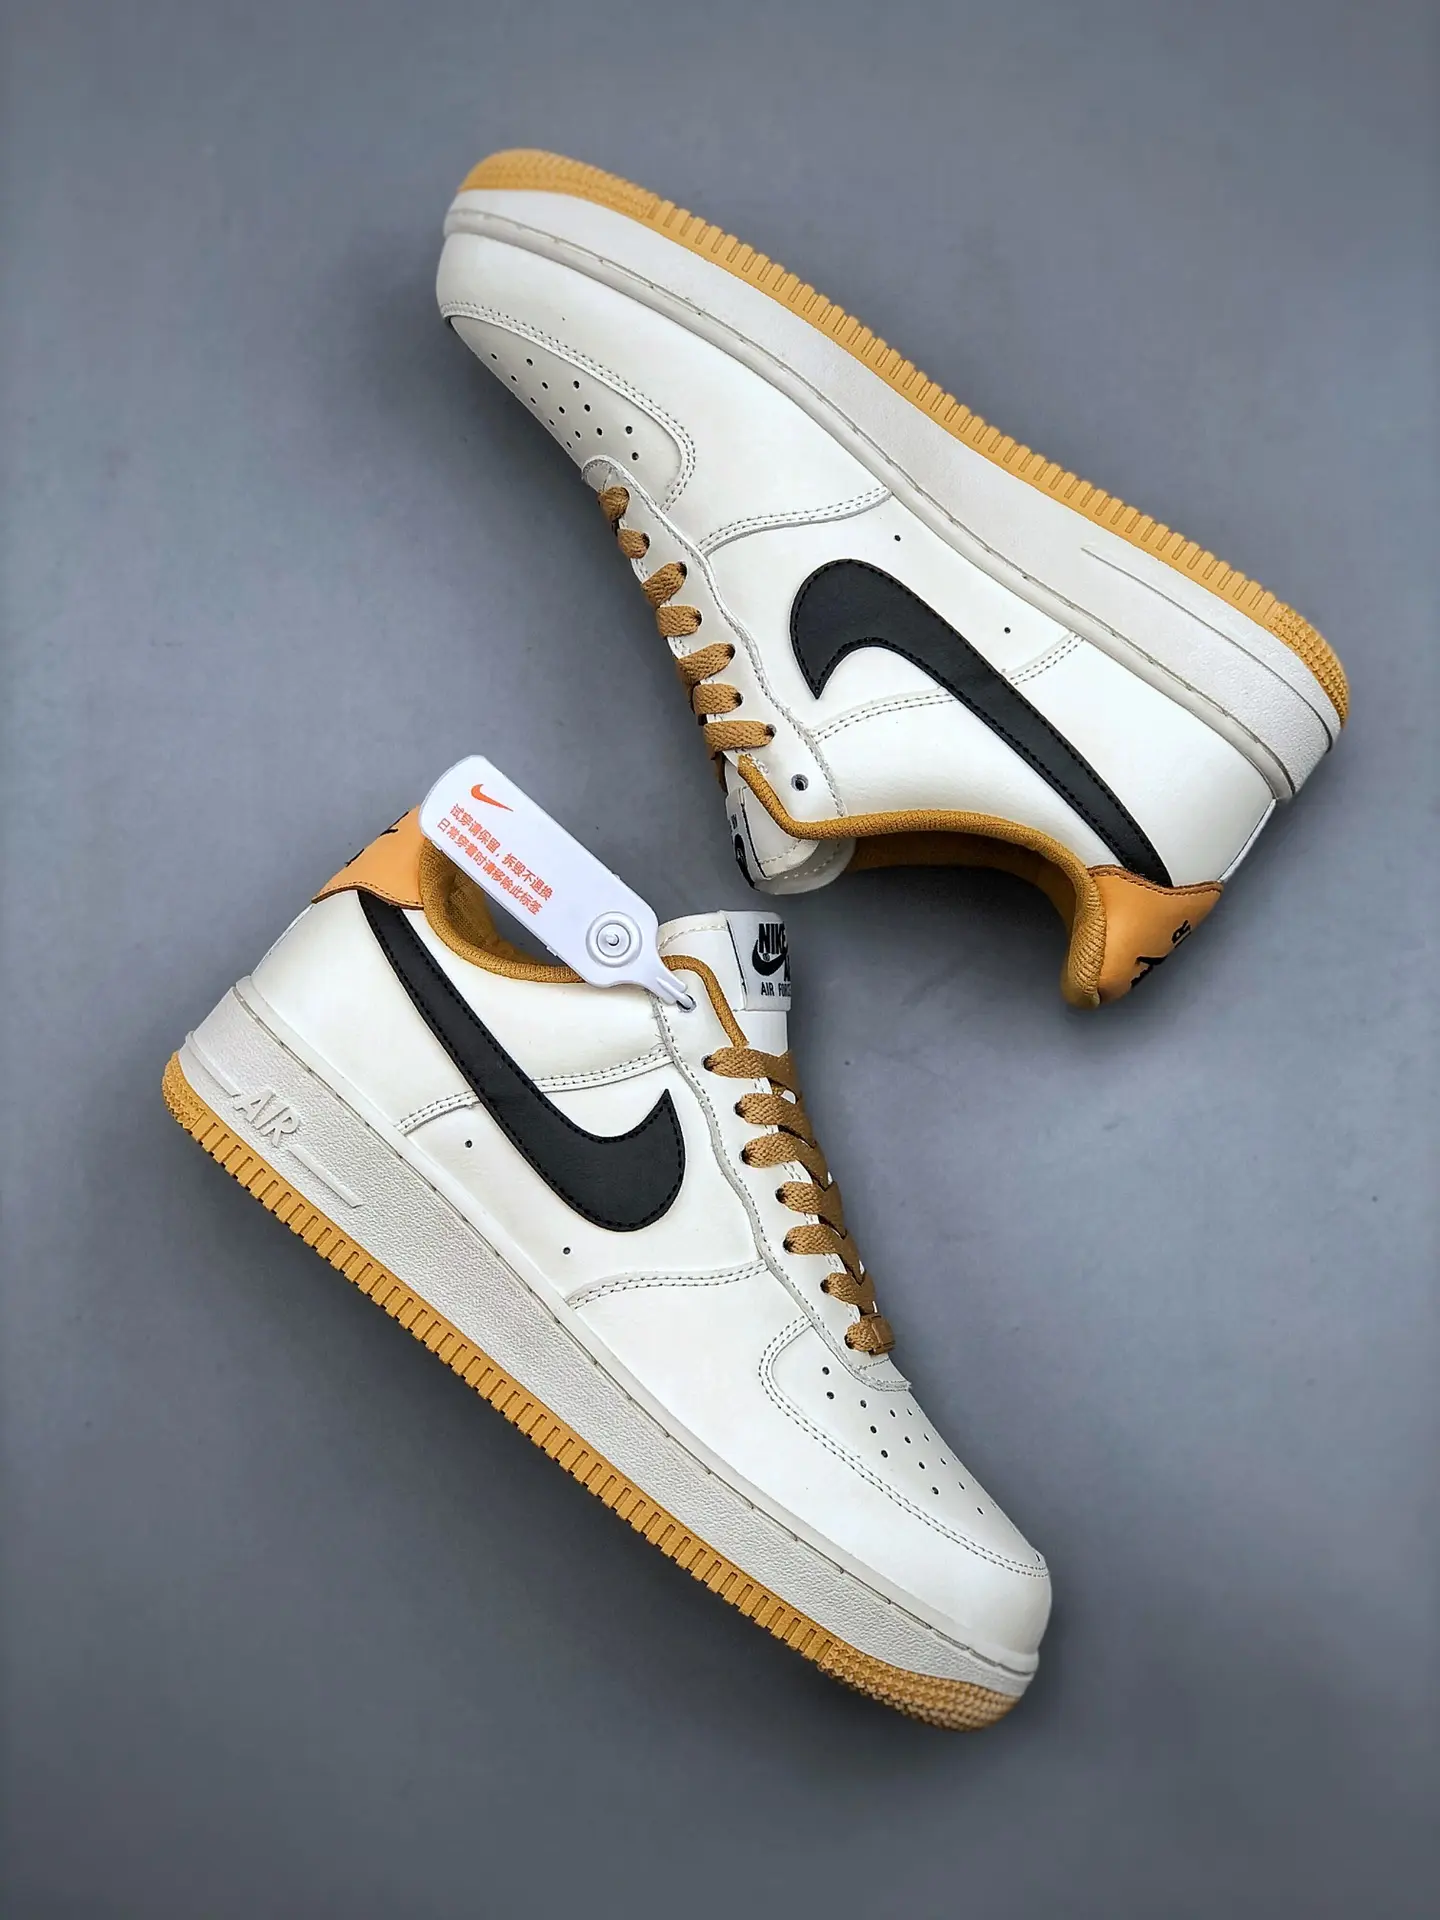 YASSW | Nike Air Force 1 Low Sail Tan Black Shoes Review